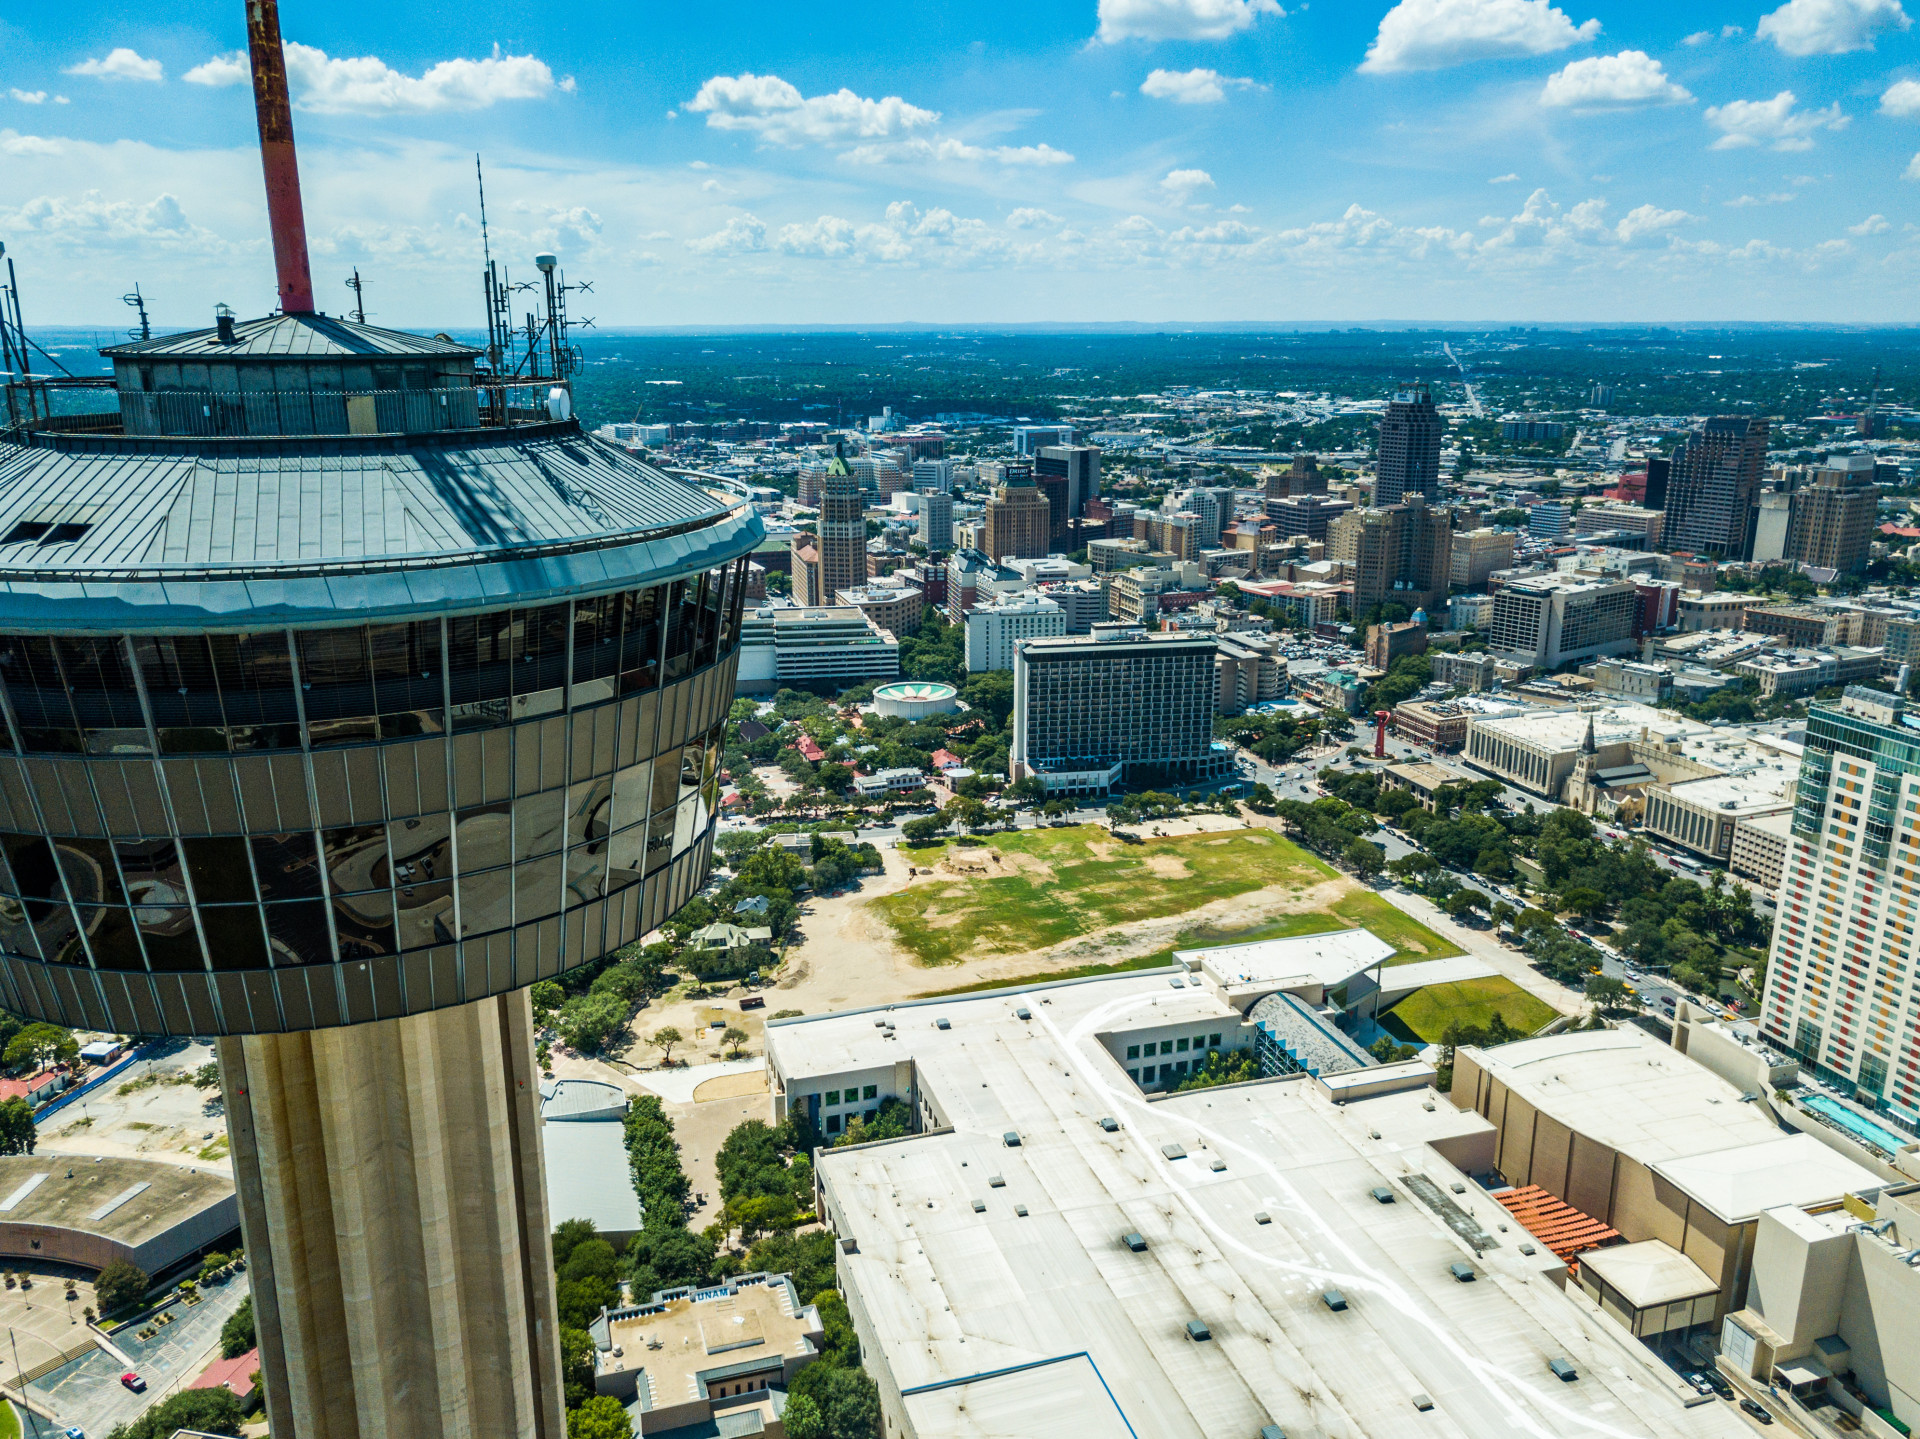 Want the birds-eye view? The Tower of Americas will give you the best panoramic view from 750 ft above.